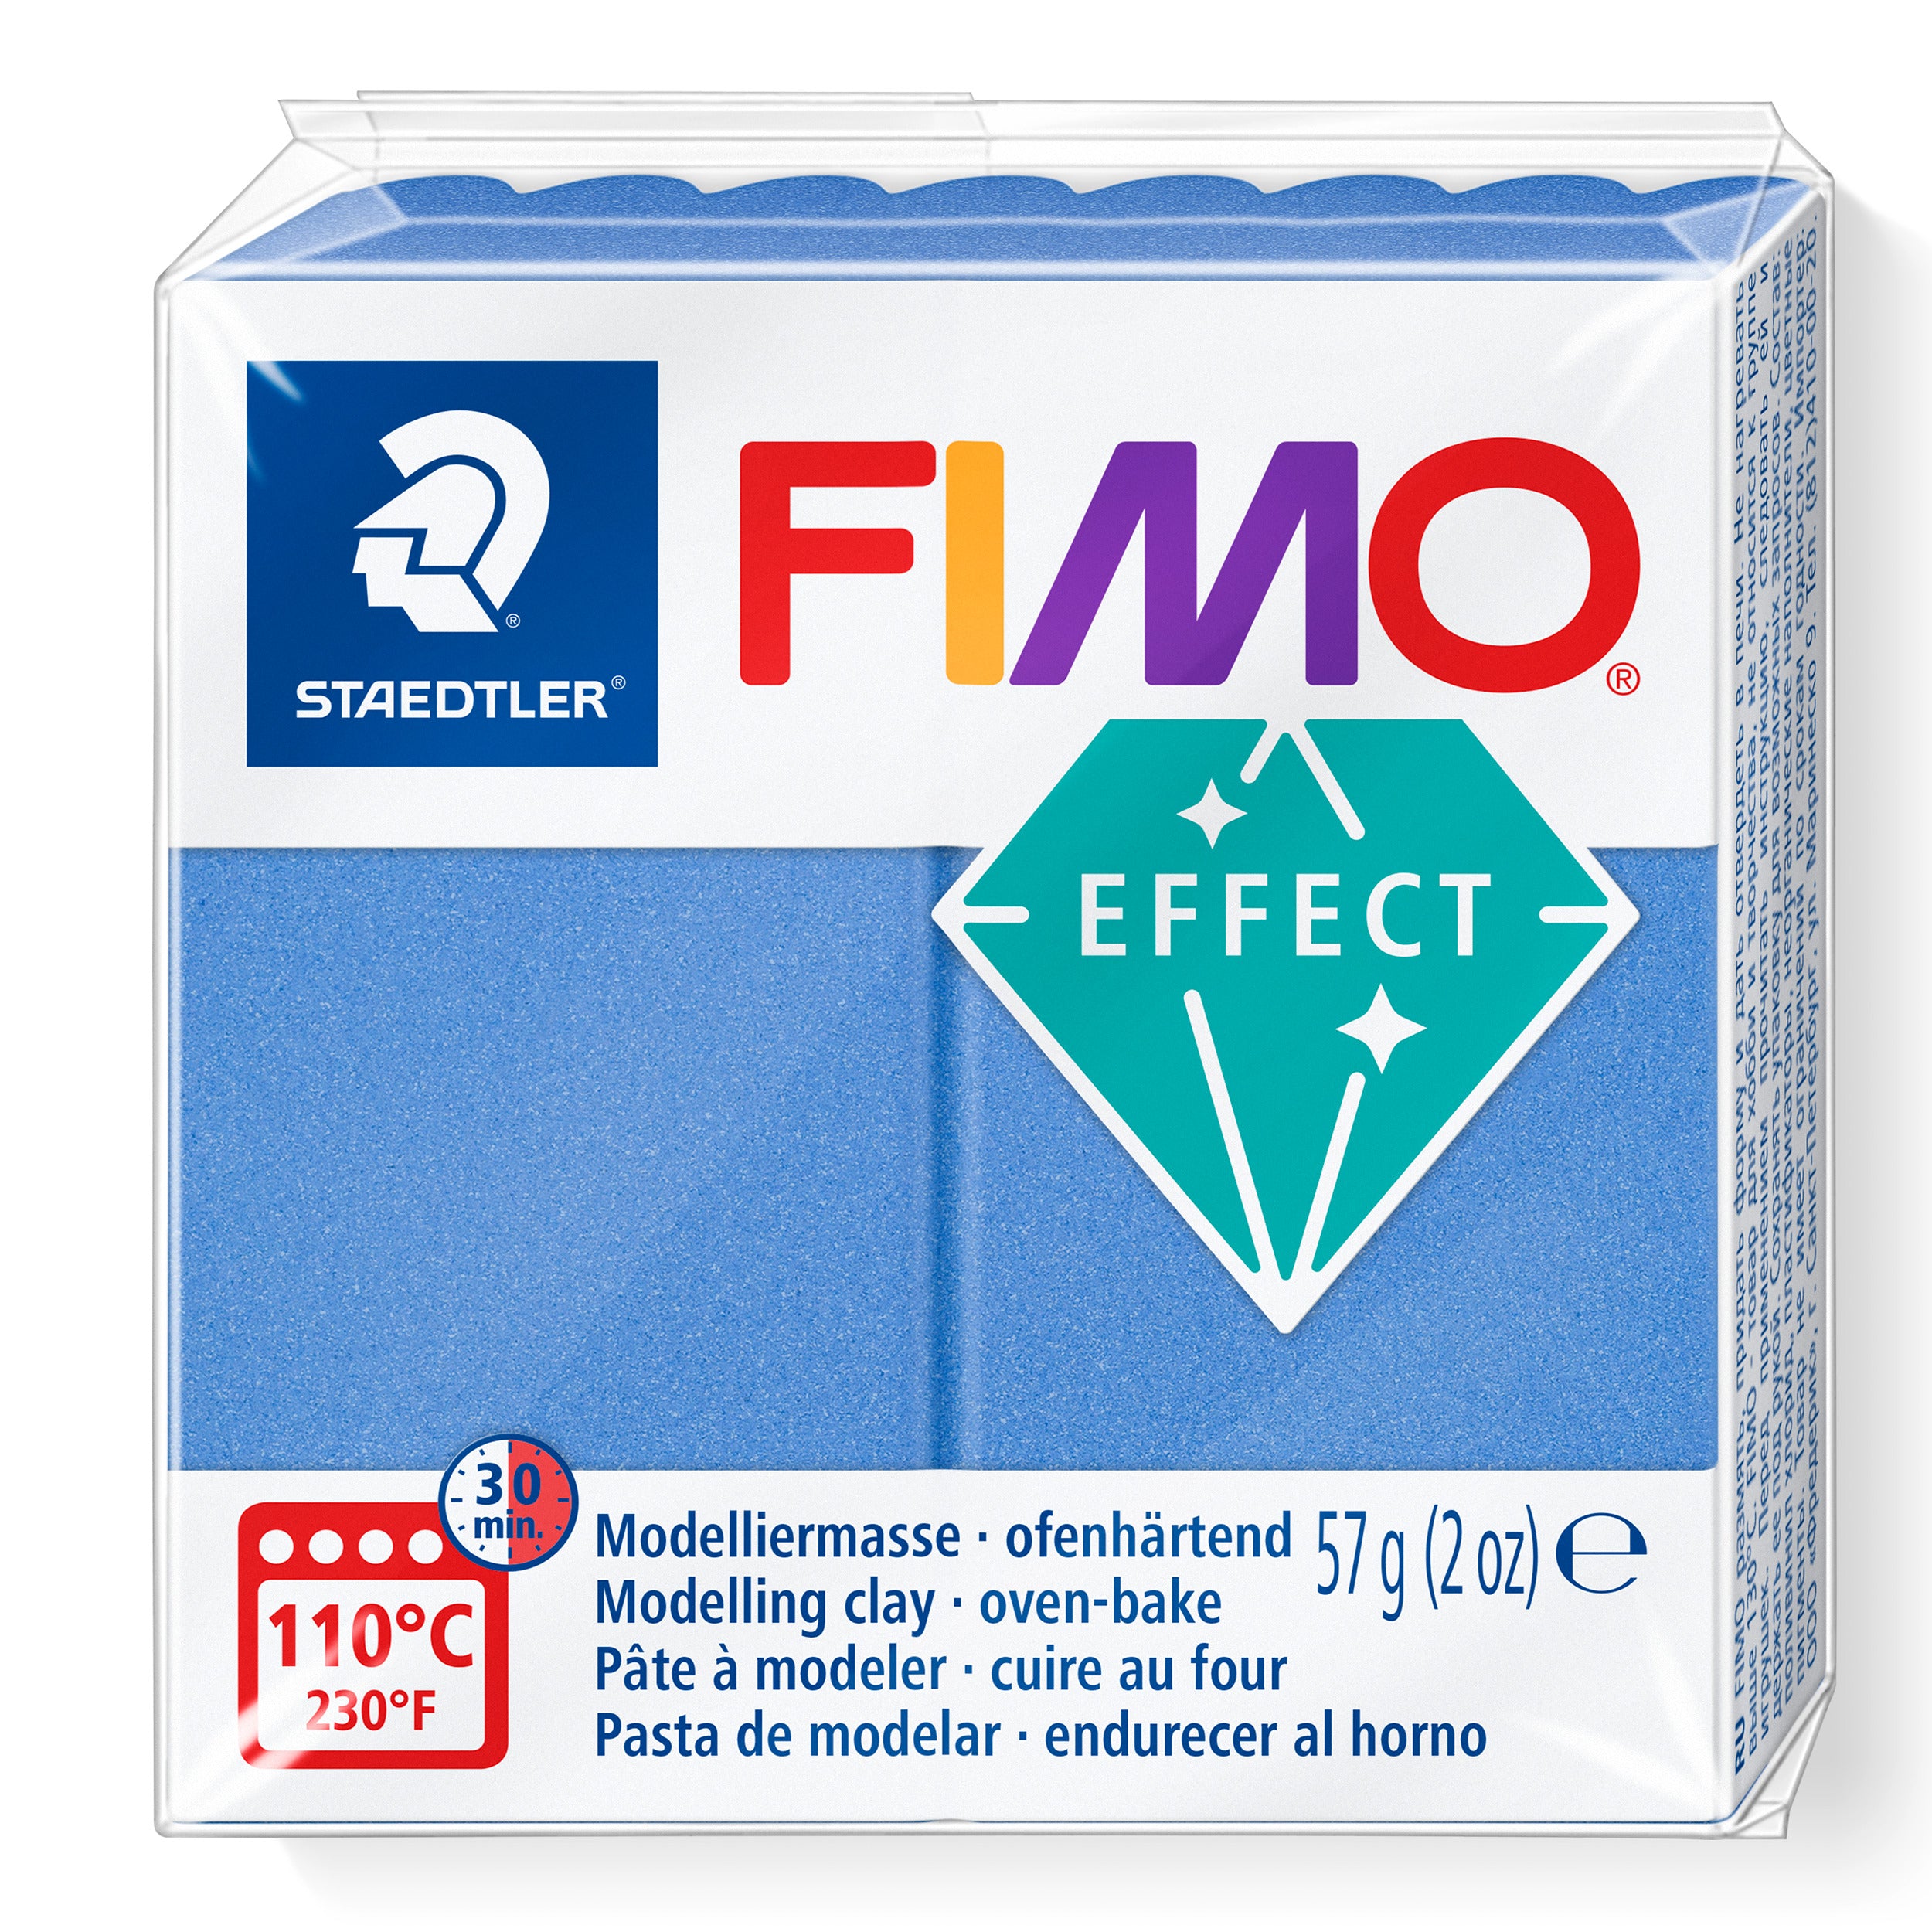 NEW Metallic Blue FIMO Effect polymer Clay 57g 8010-31